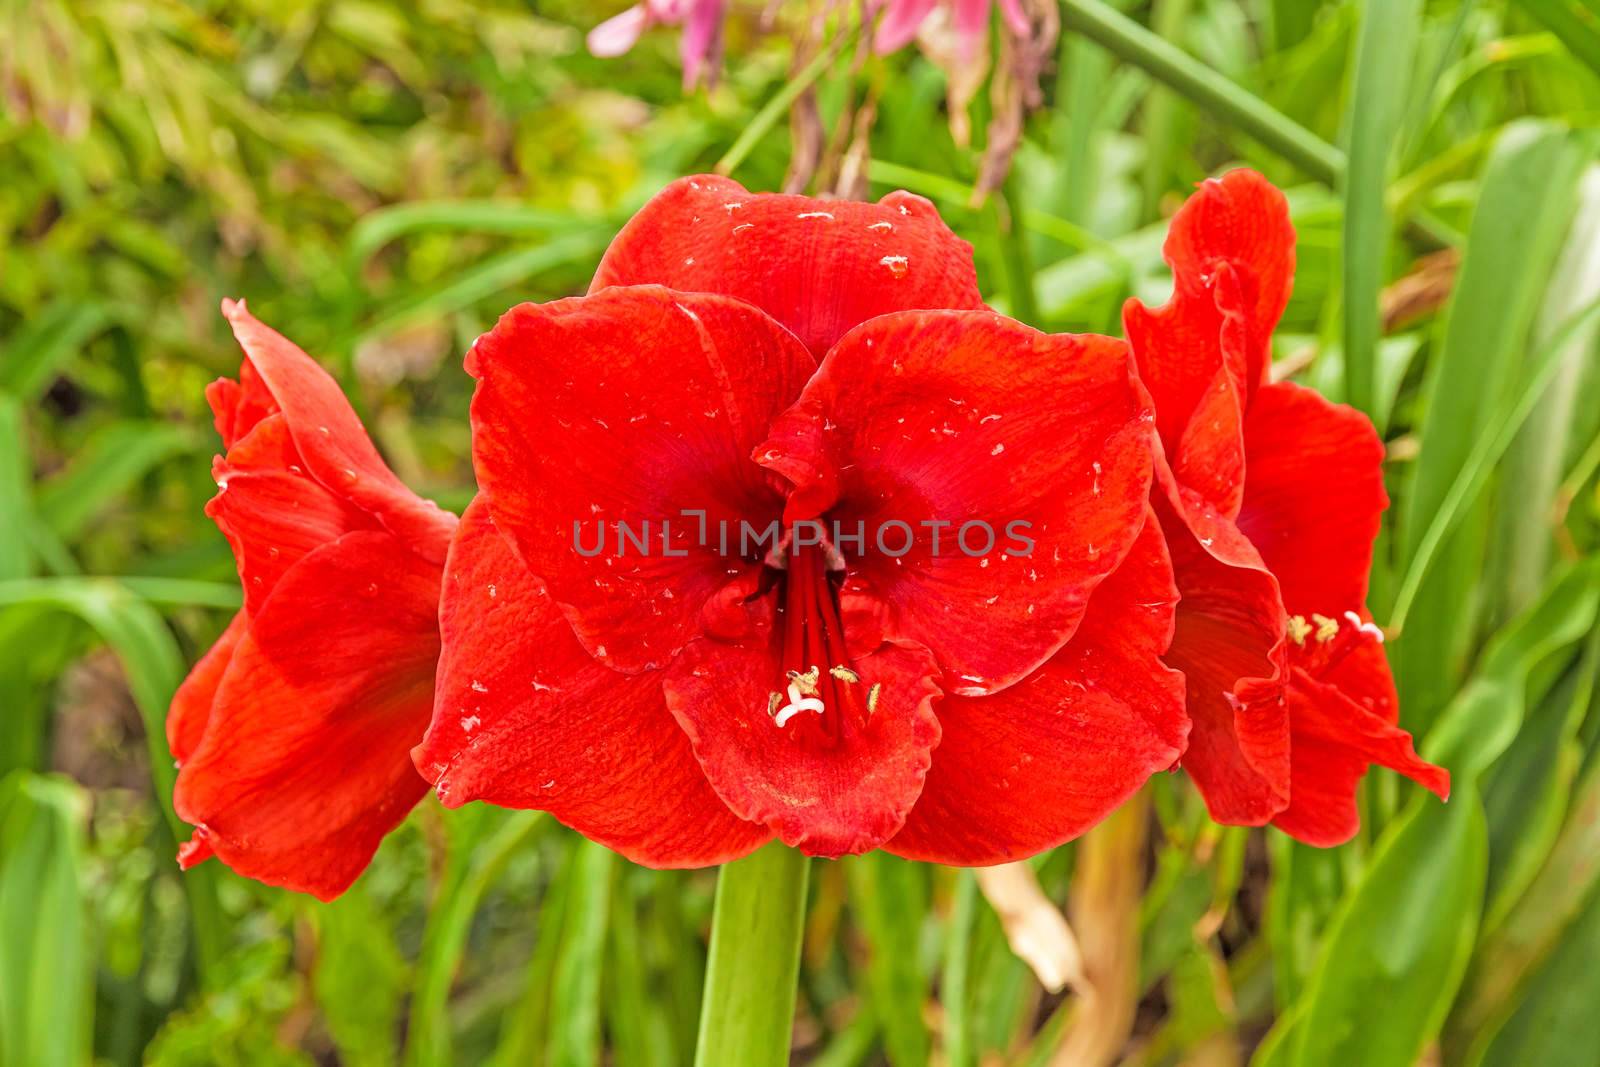 Amaryllis blossom, red with green stem - green natural background